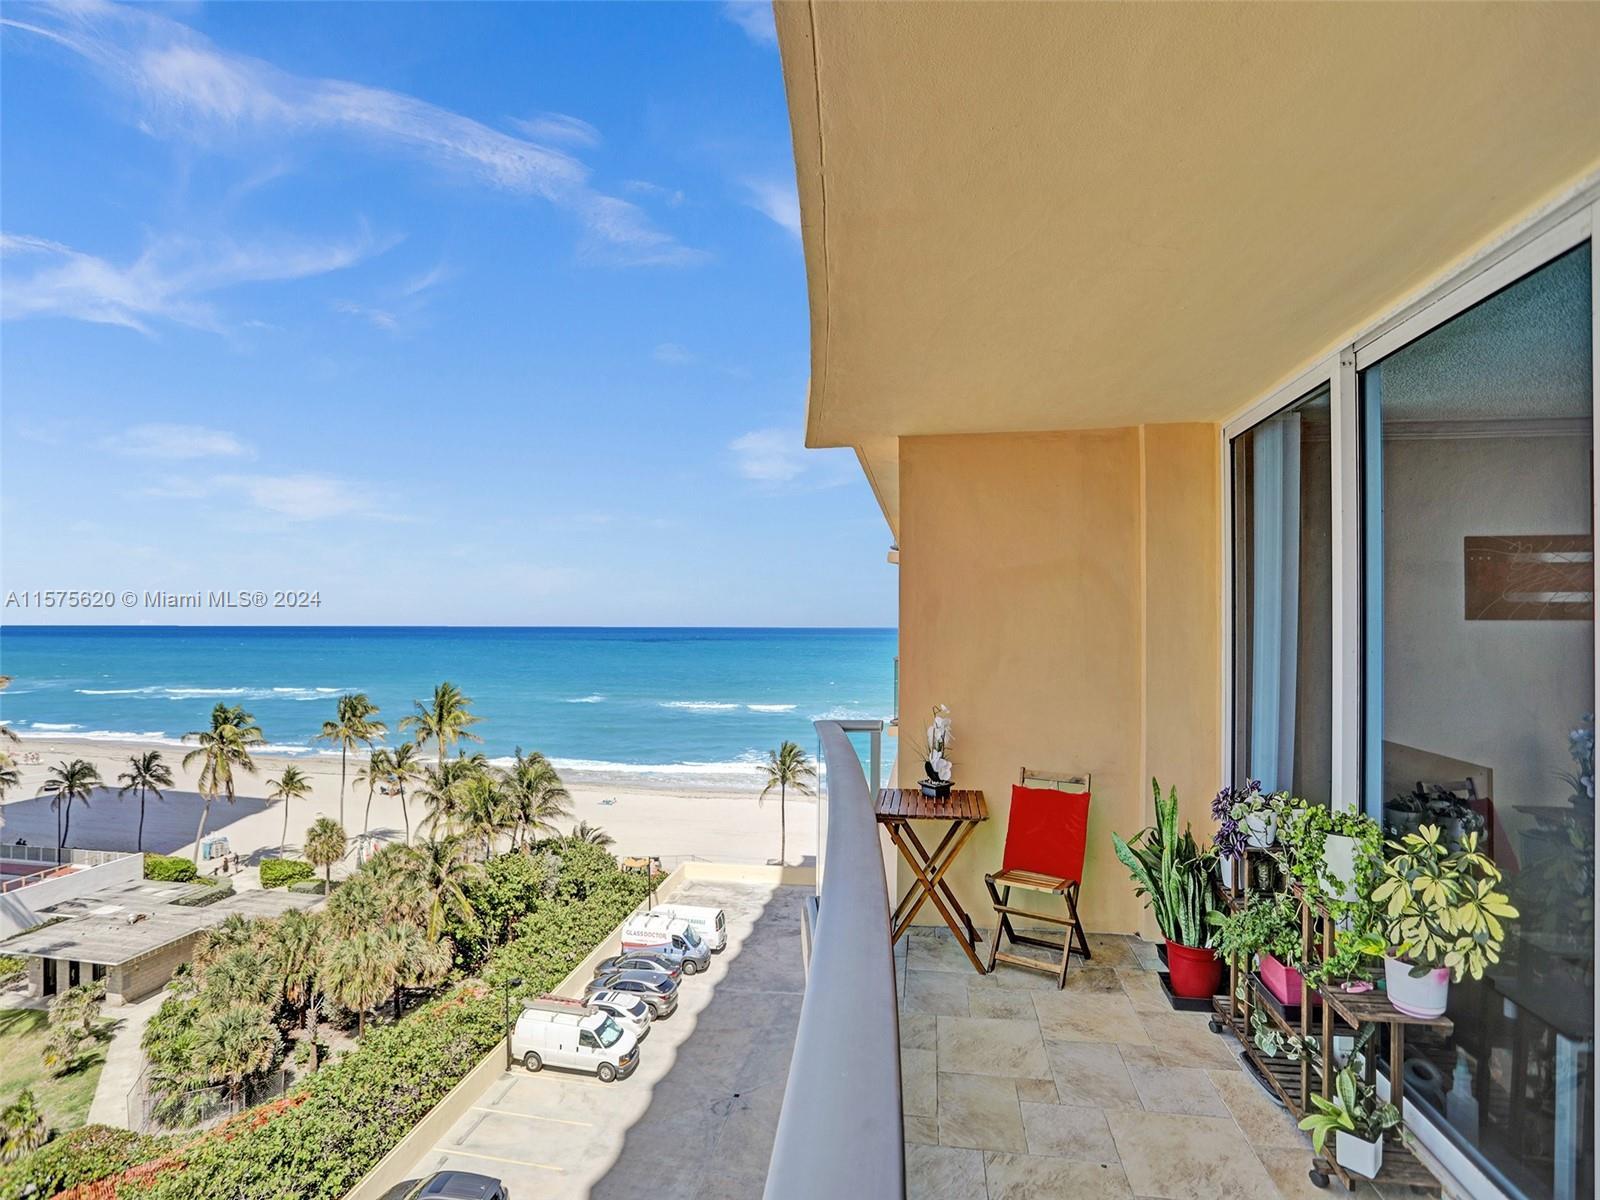 Great opportunity to own a Beachfront Studio offering breathtaking ocean views. Step onto the spacio